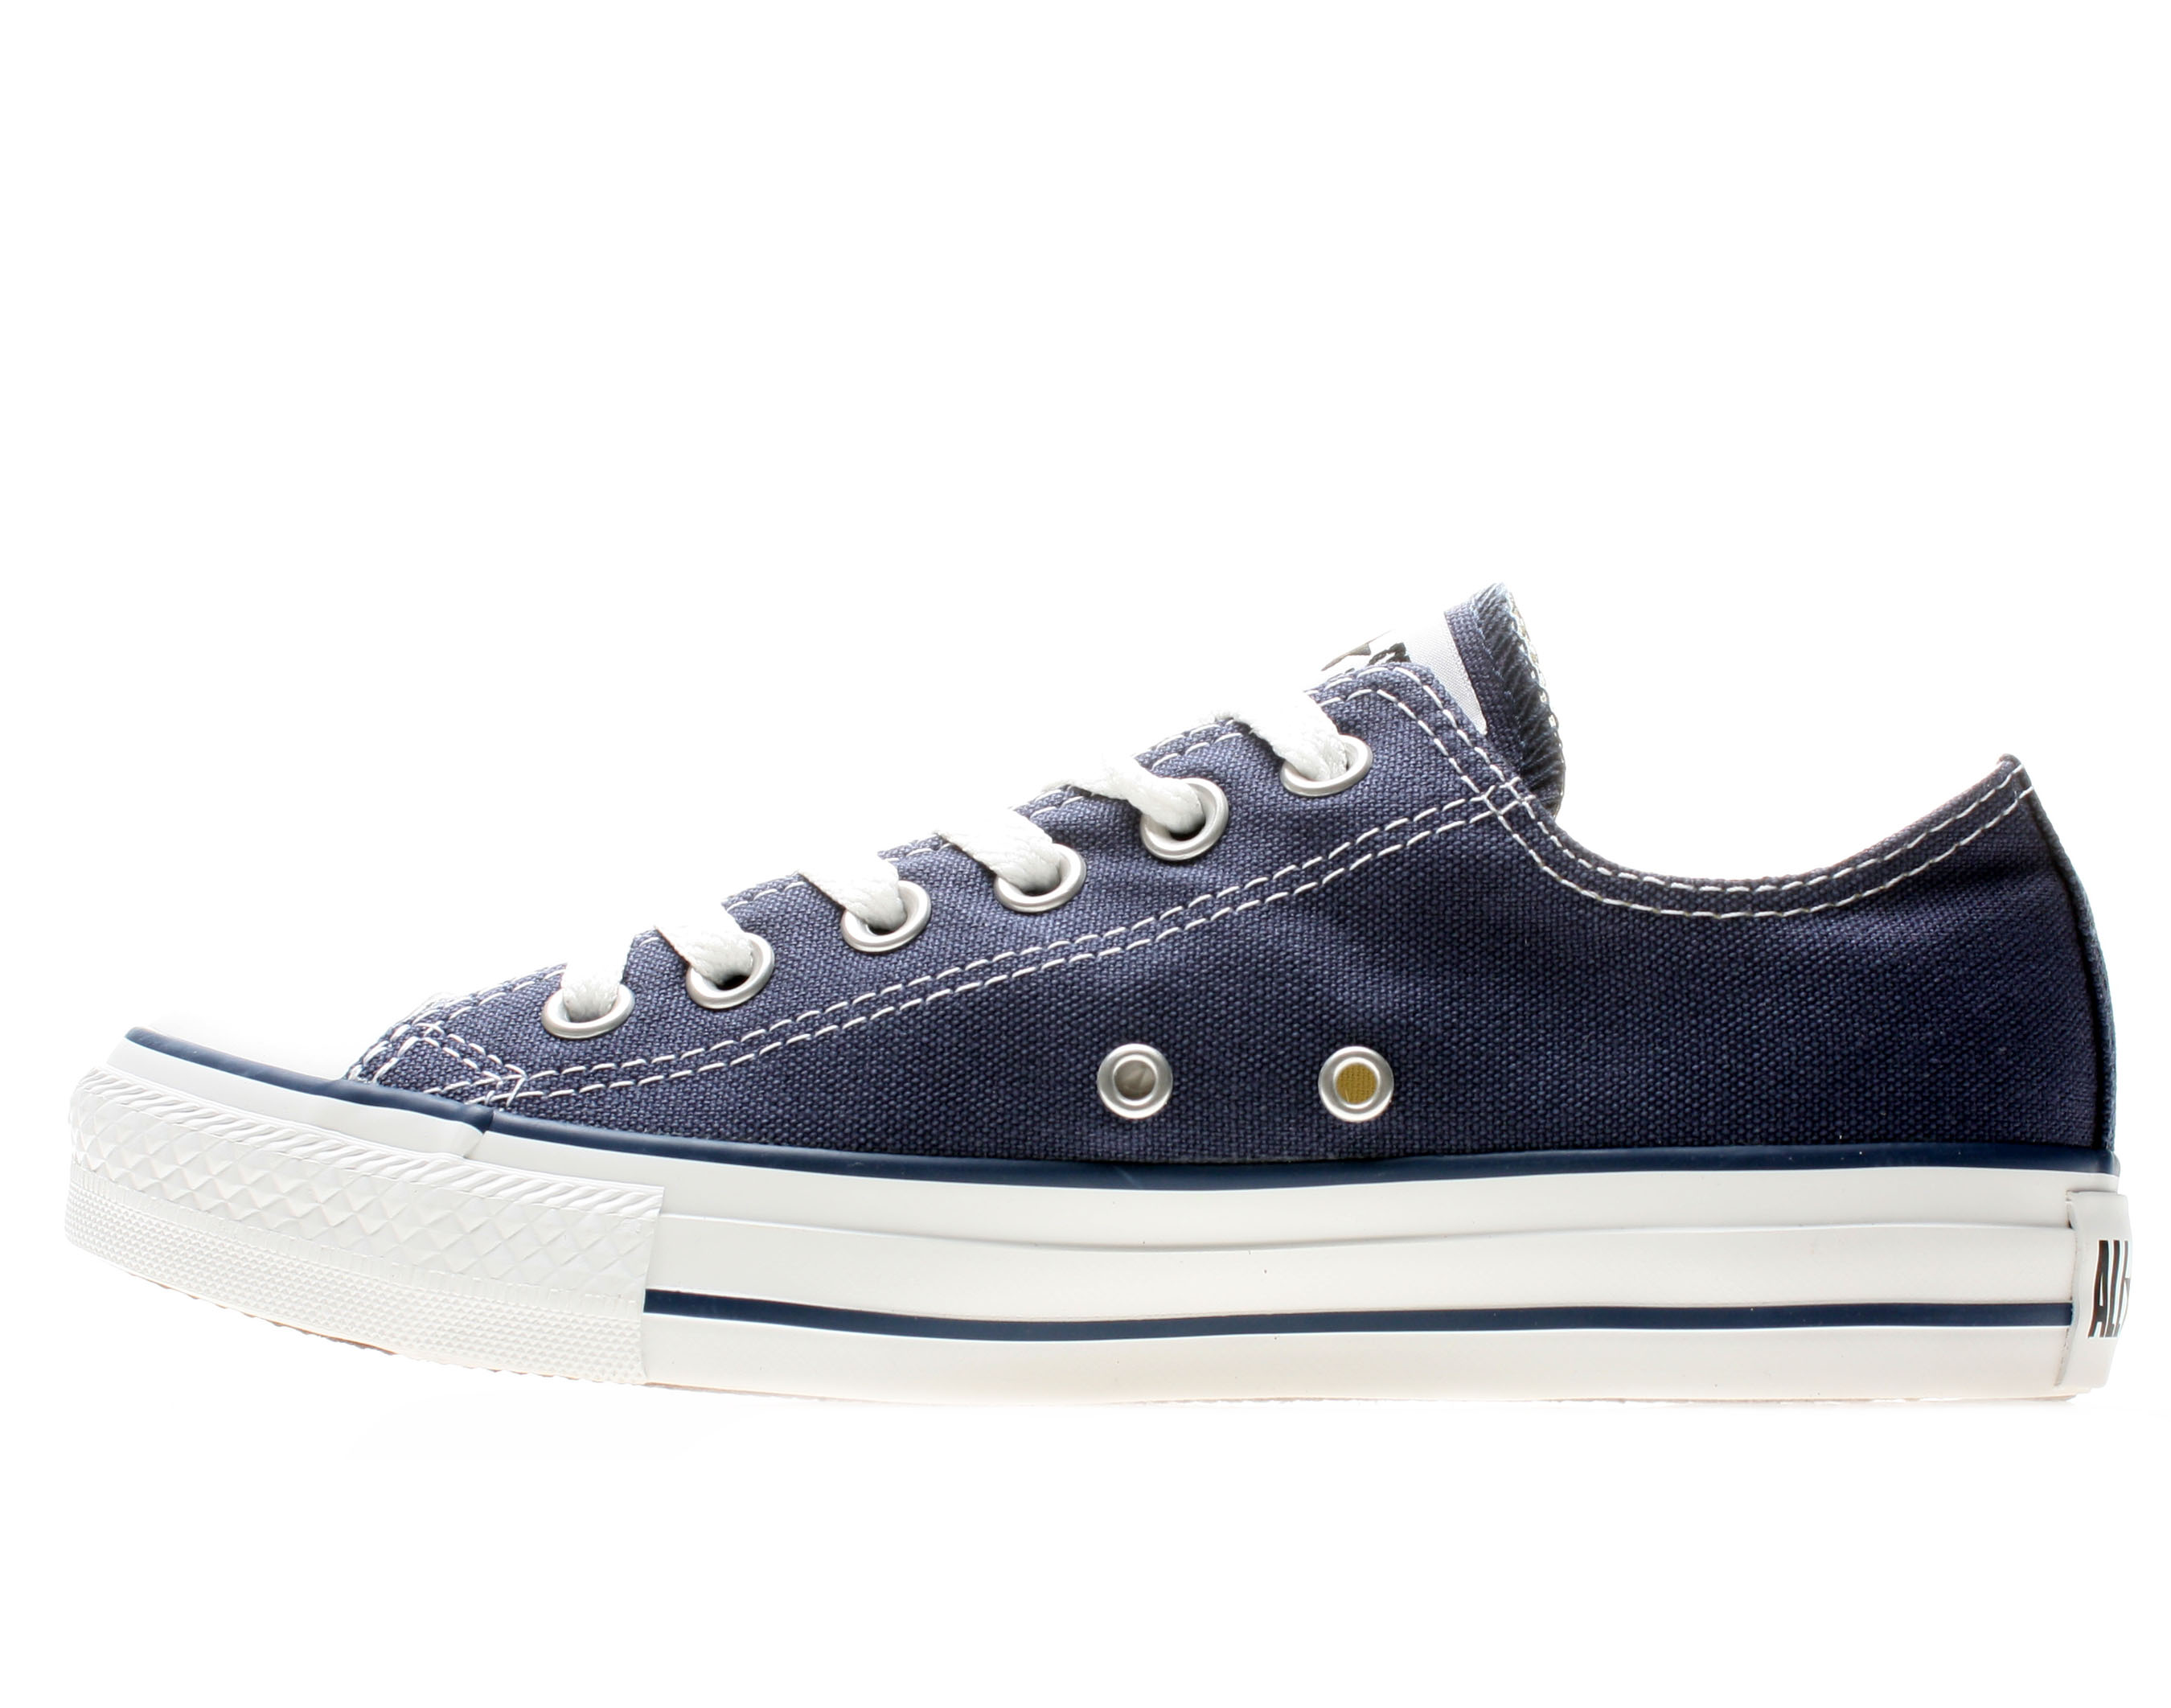 Converse Chuck Taylor All Star Canvas Low Top Sneaker - image 3 of 6